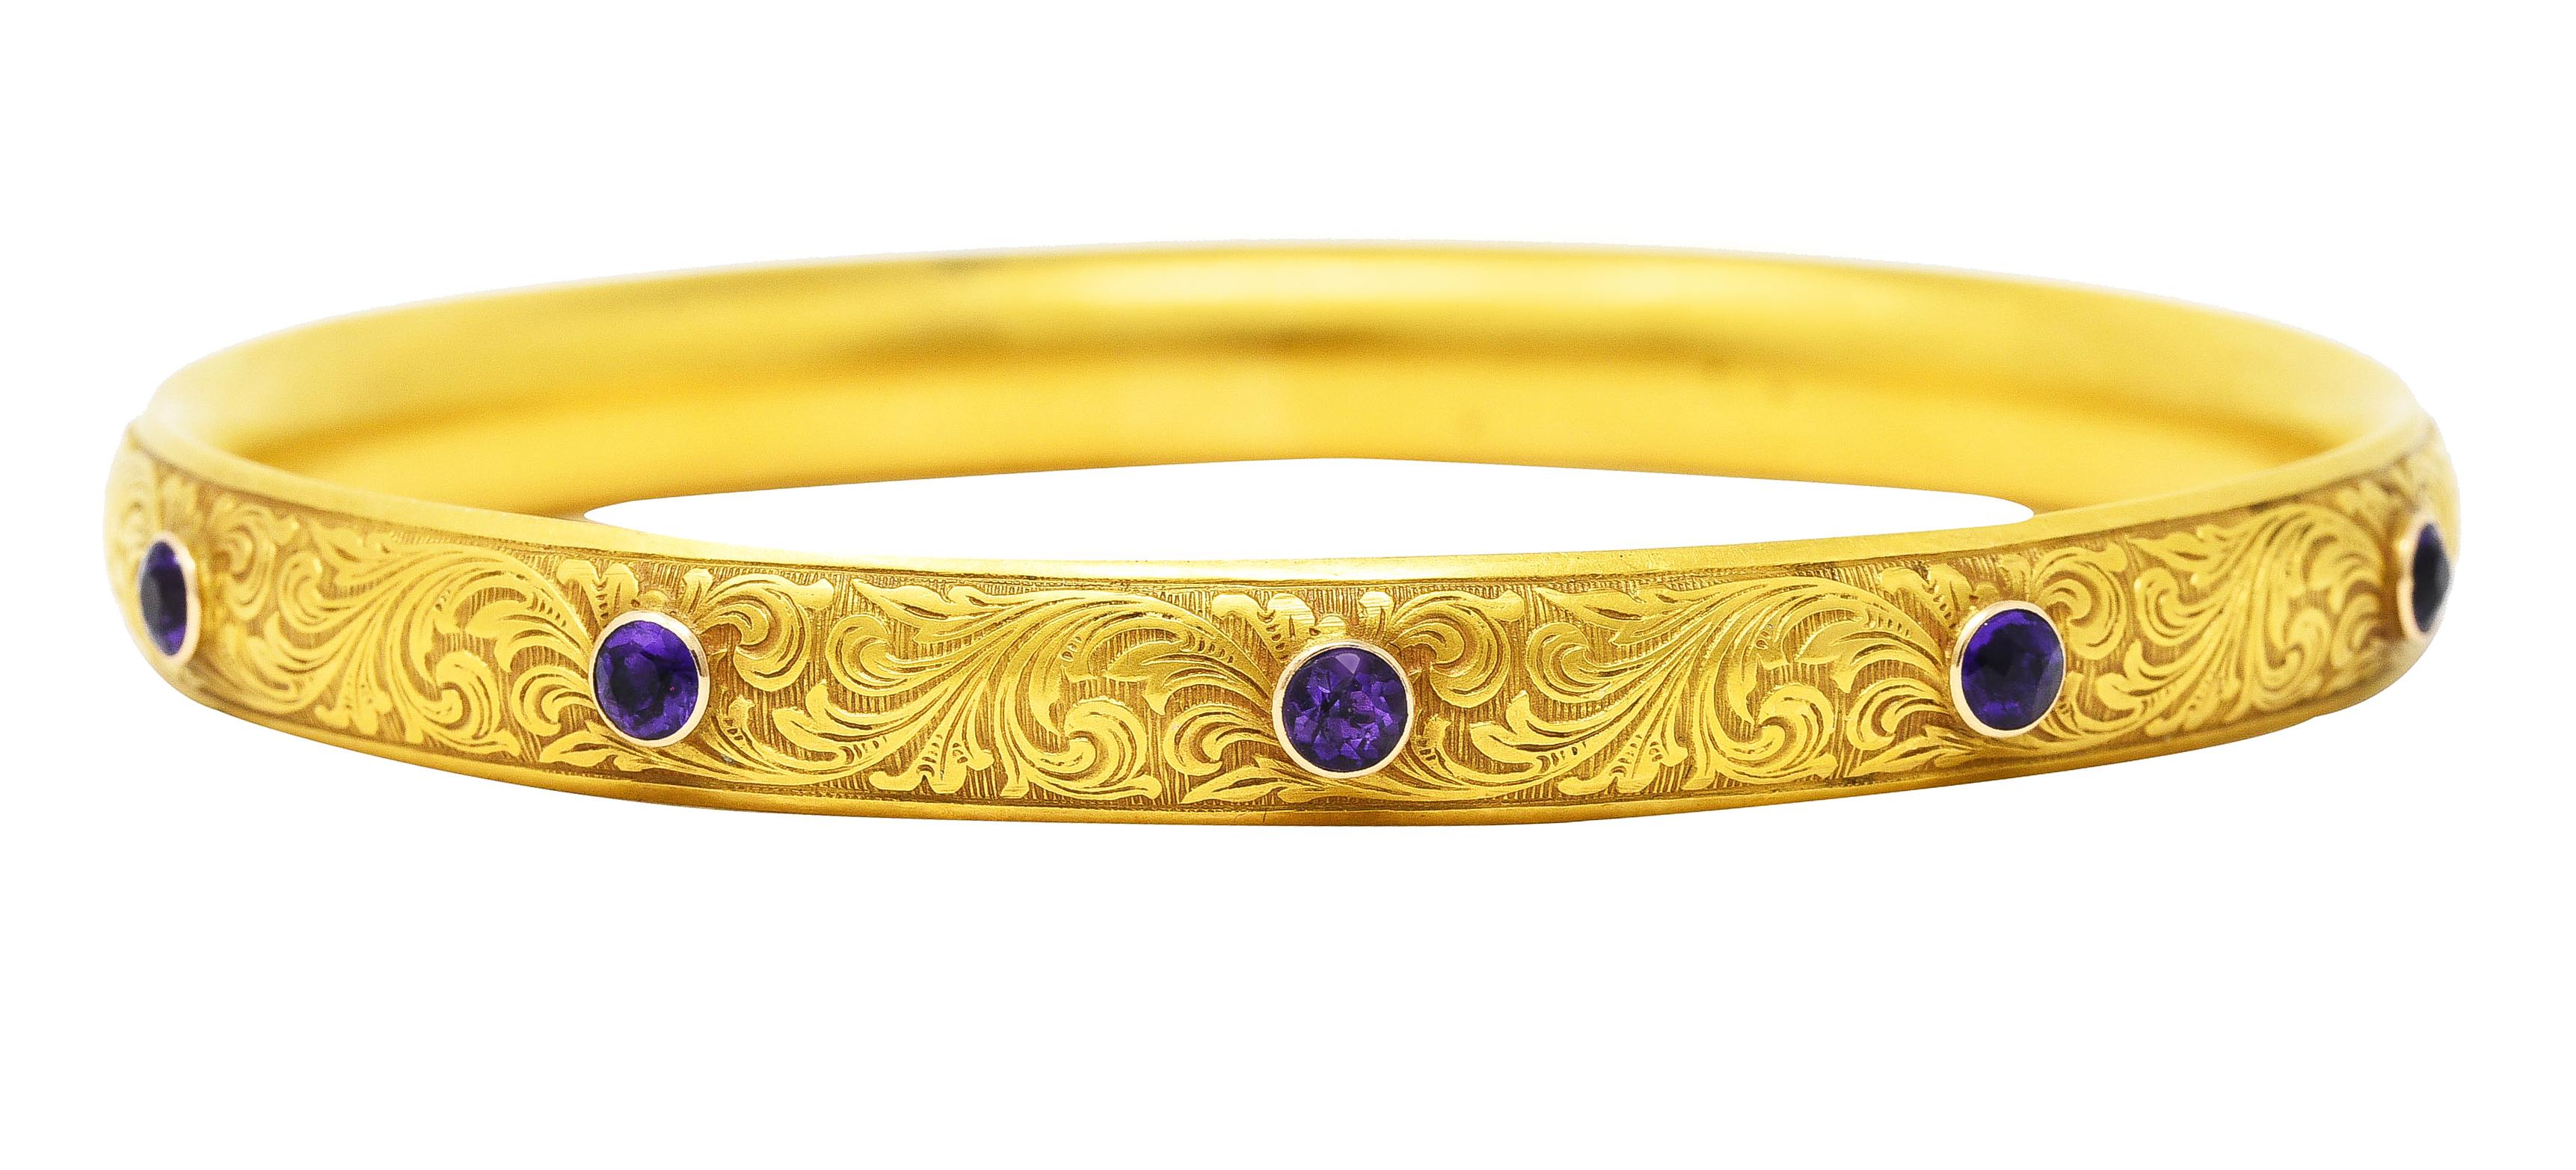 Bangle bracelet features a raised scrolled whiplash motif atop an engraved linear texture. Featuring five bezel set 3.0 mm round cut amethysts. Transparent medium-dark purple in color.
Inscribed 'LEB from MJB 1908'. Stamped 14K for 14 karat gold.